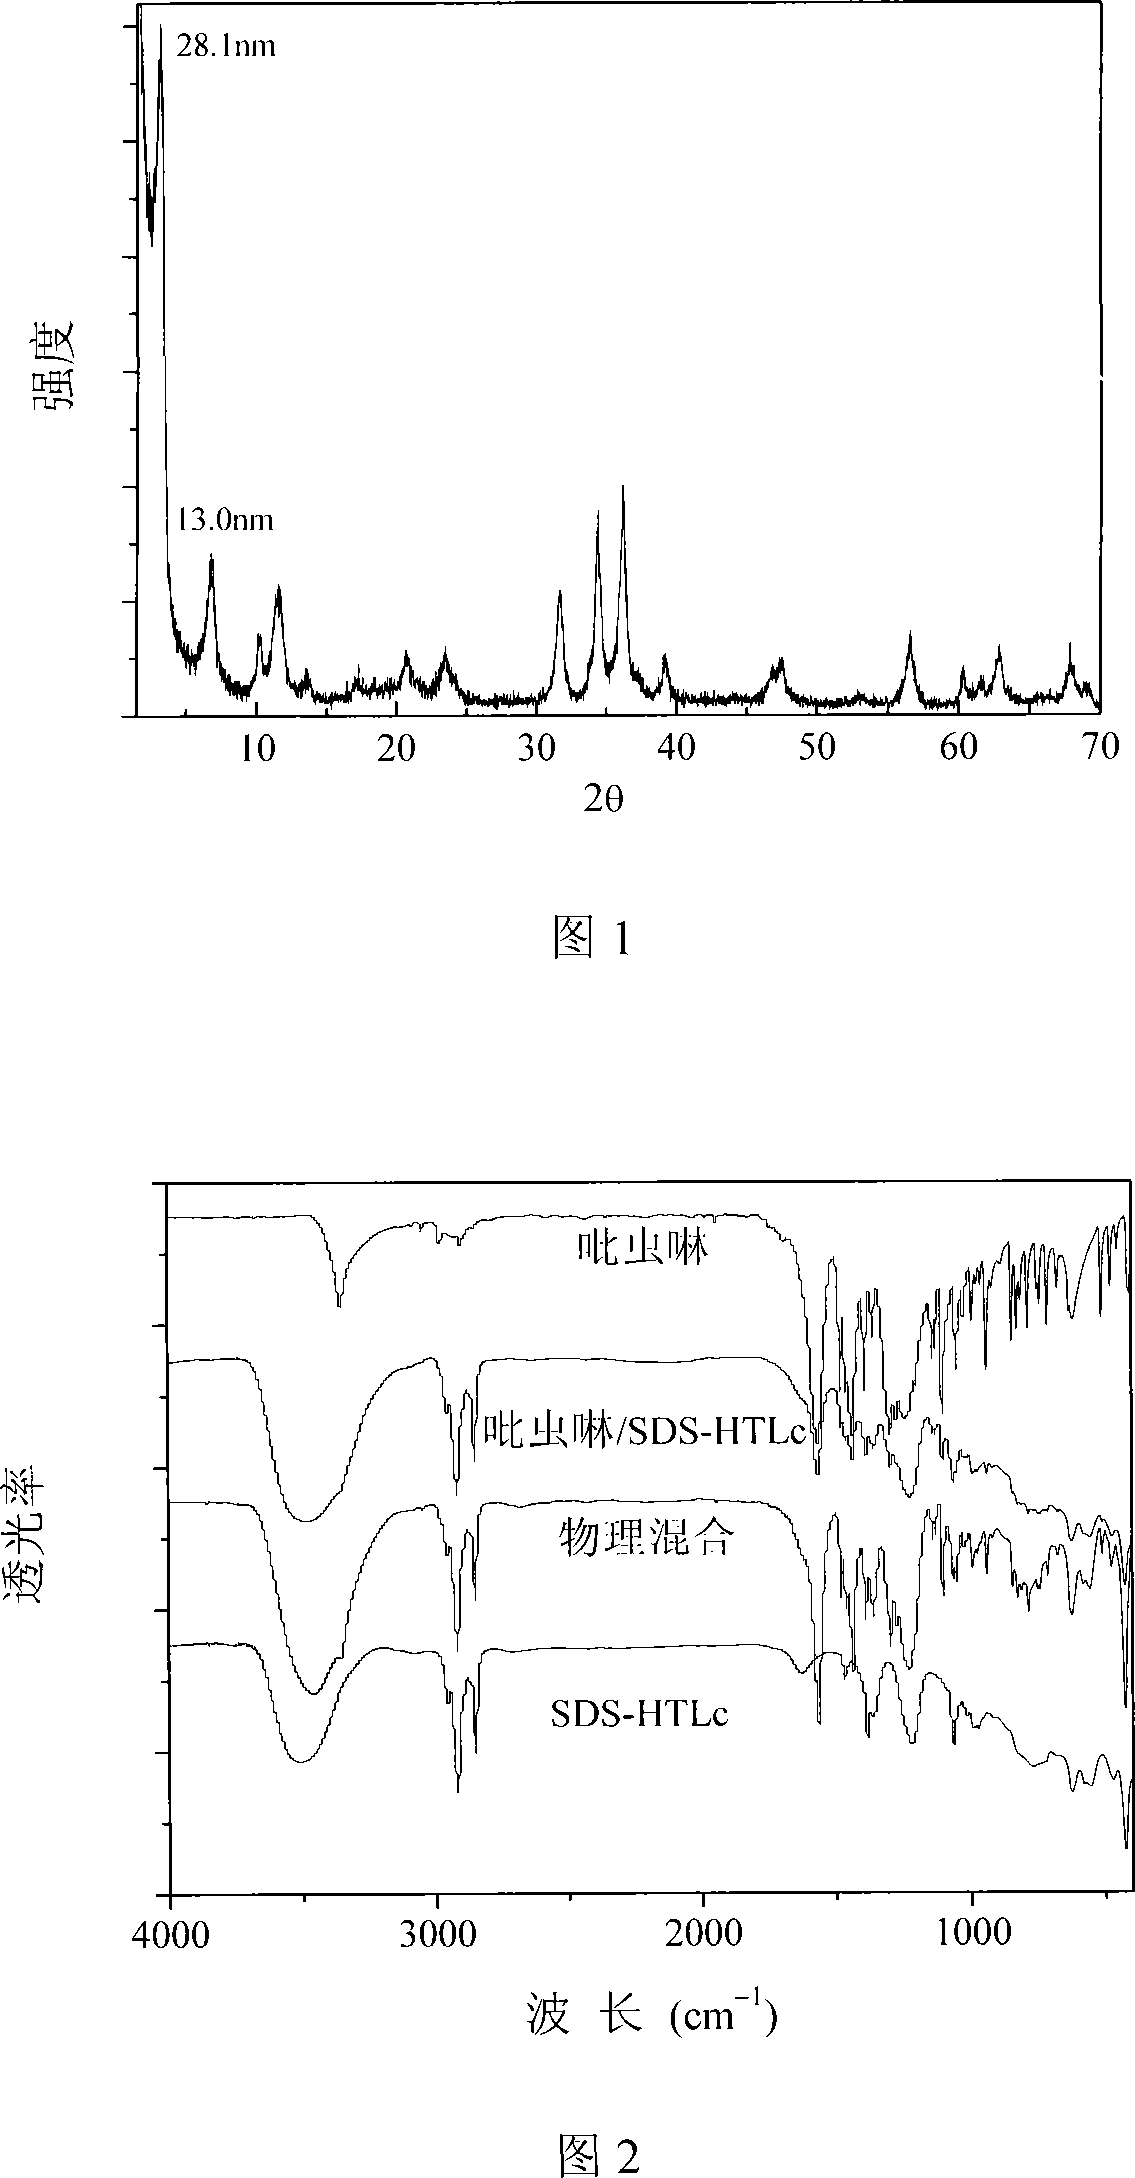 Imidacloprid/hydrotalcite-like compounds nano hybridisation article and method for producing the same